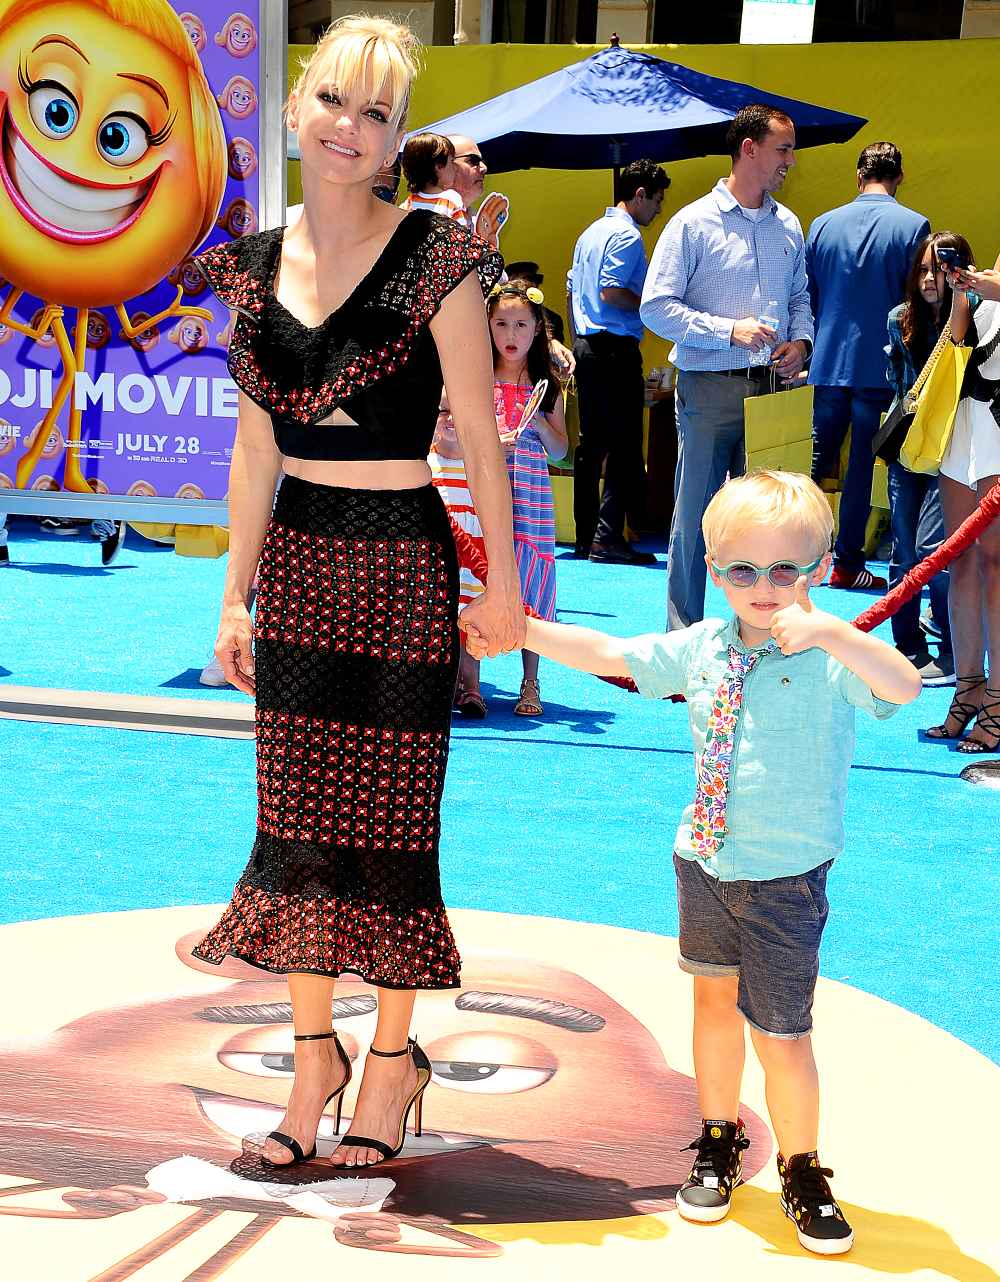 Anna Faris and son Jack attend the premiere of "The Emoji Movie" at Regency Village Theatre on July 23, 2017 in Westwood, California.